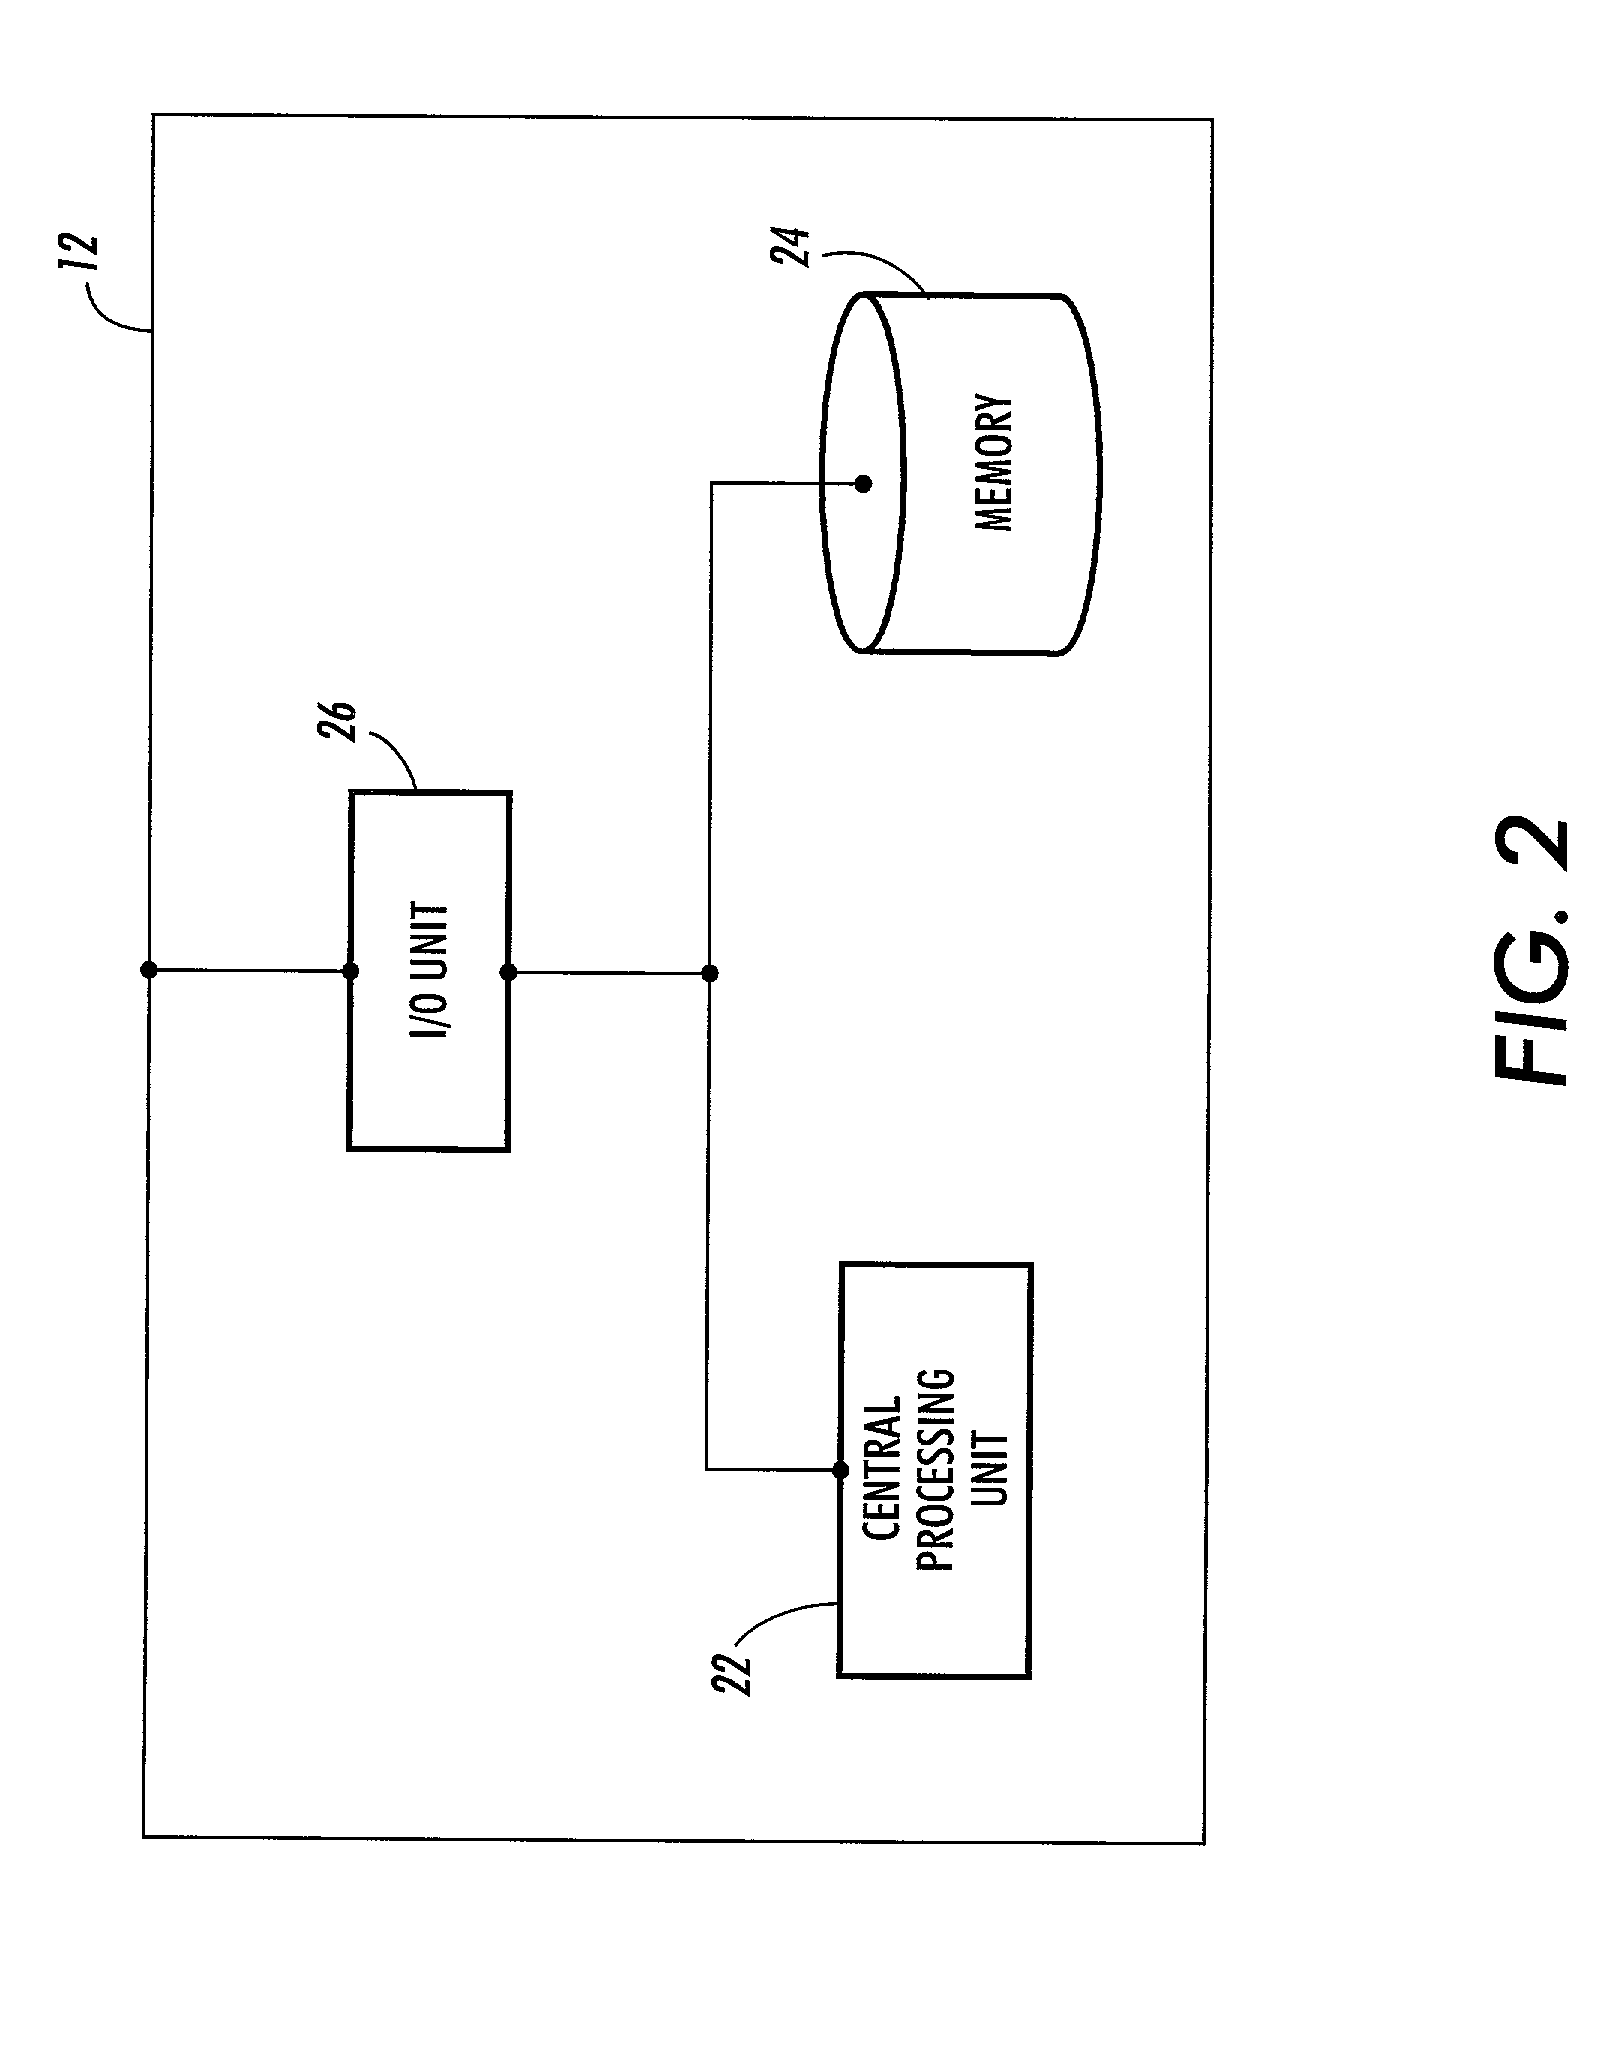 System and method for providing context information